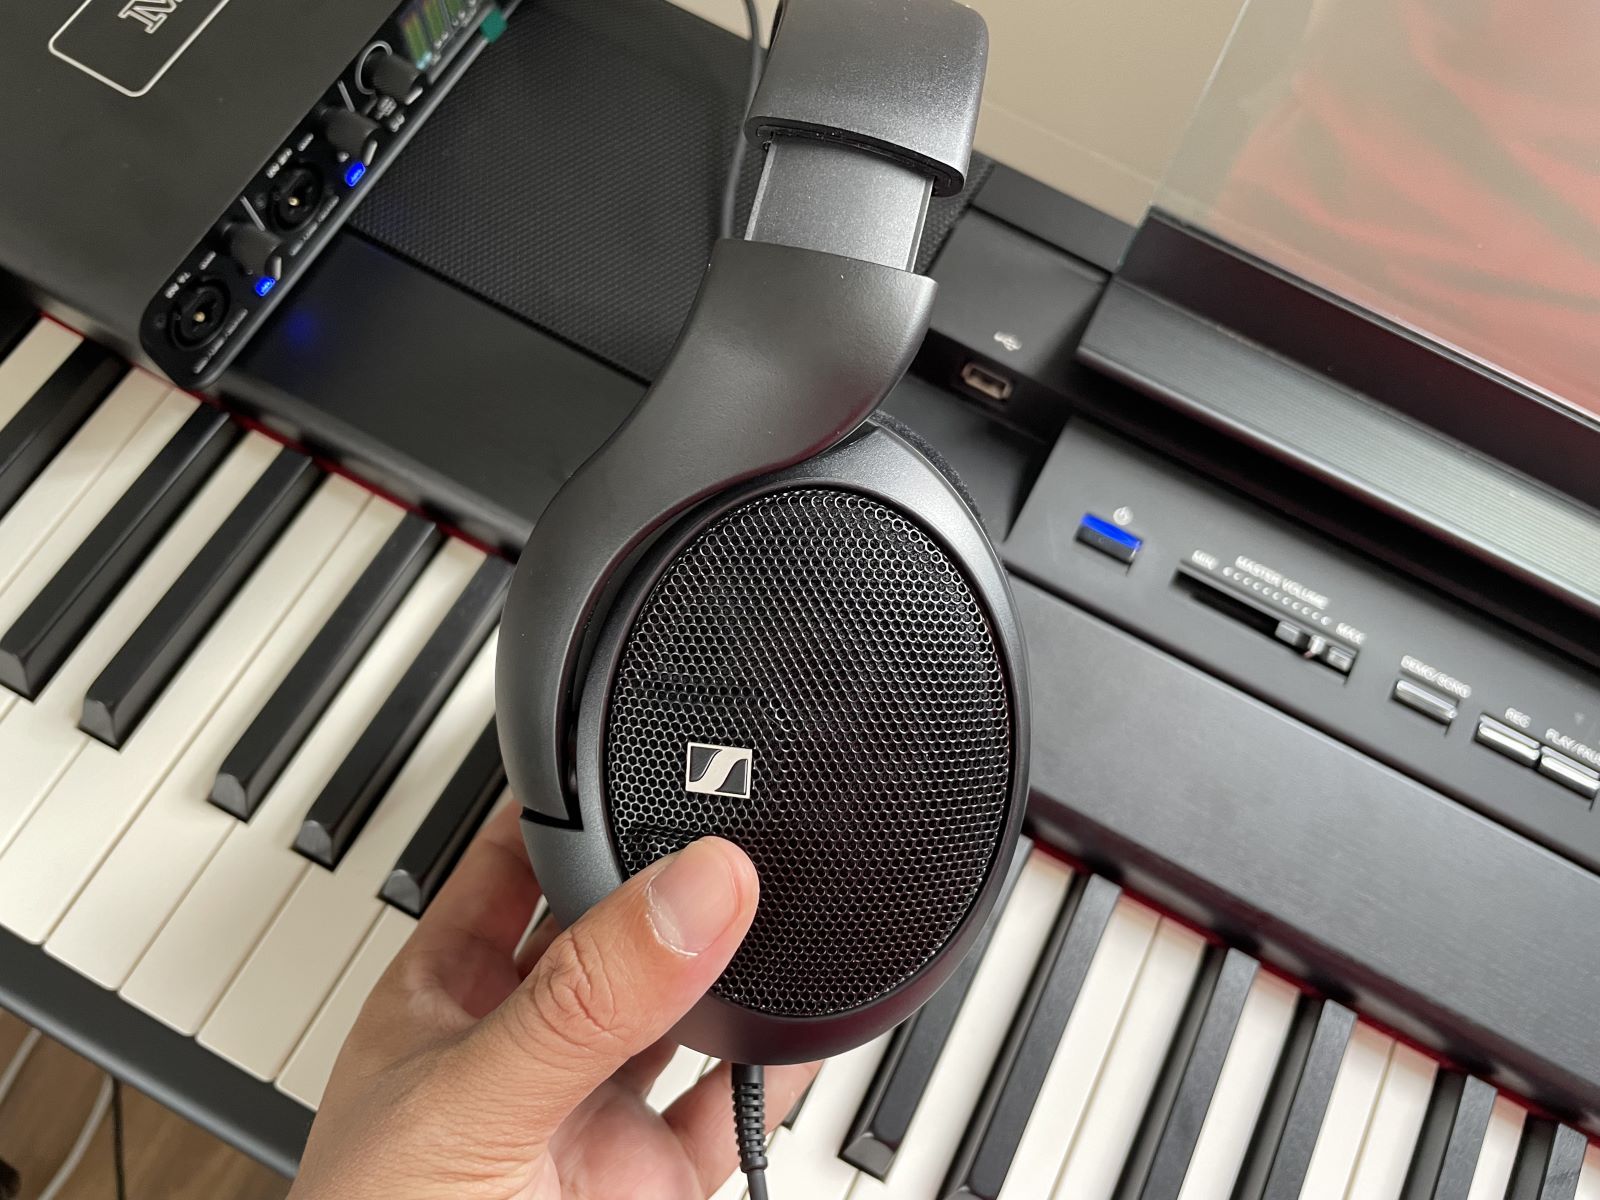 How To Use Headphones With A Digital Piano